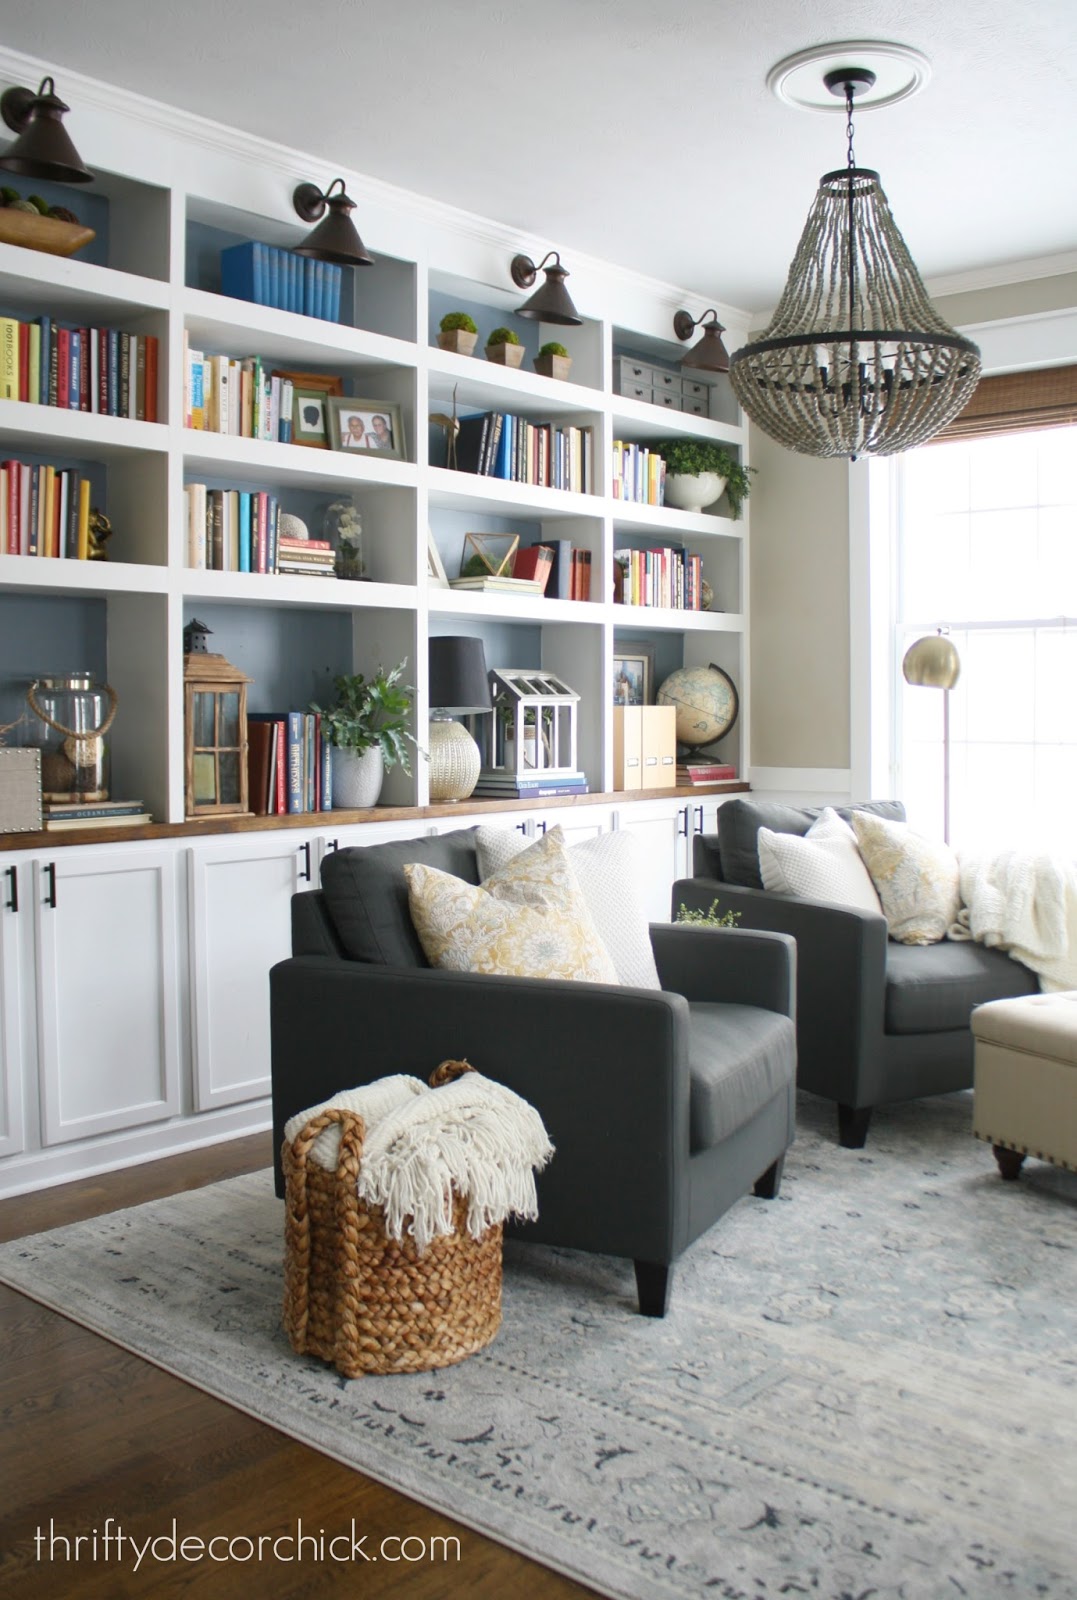 Simplifying the library shelves | Thrifty Decor Chick | Thrifty DIY